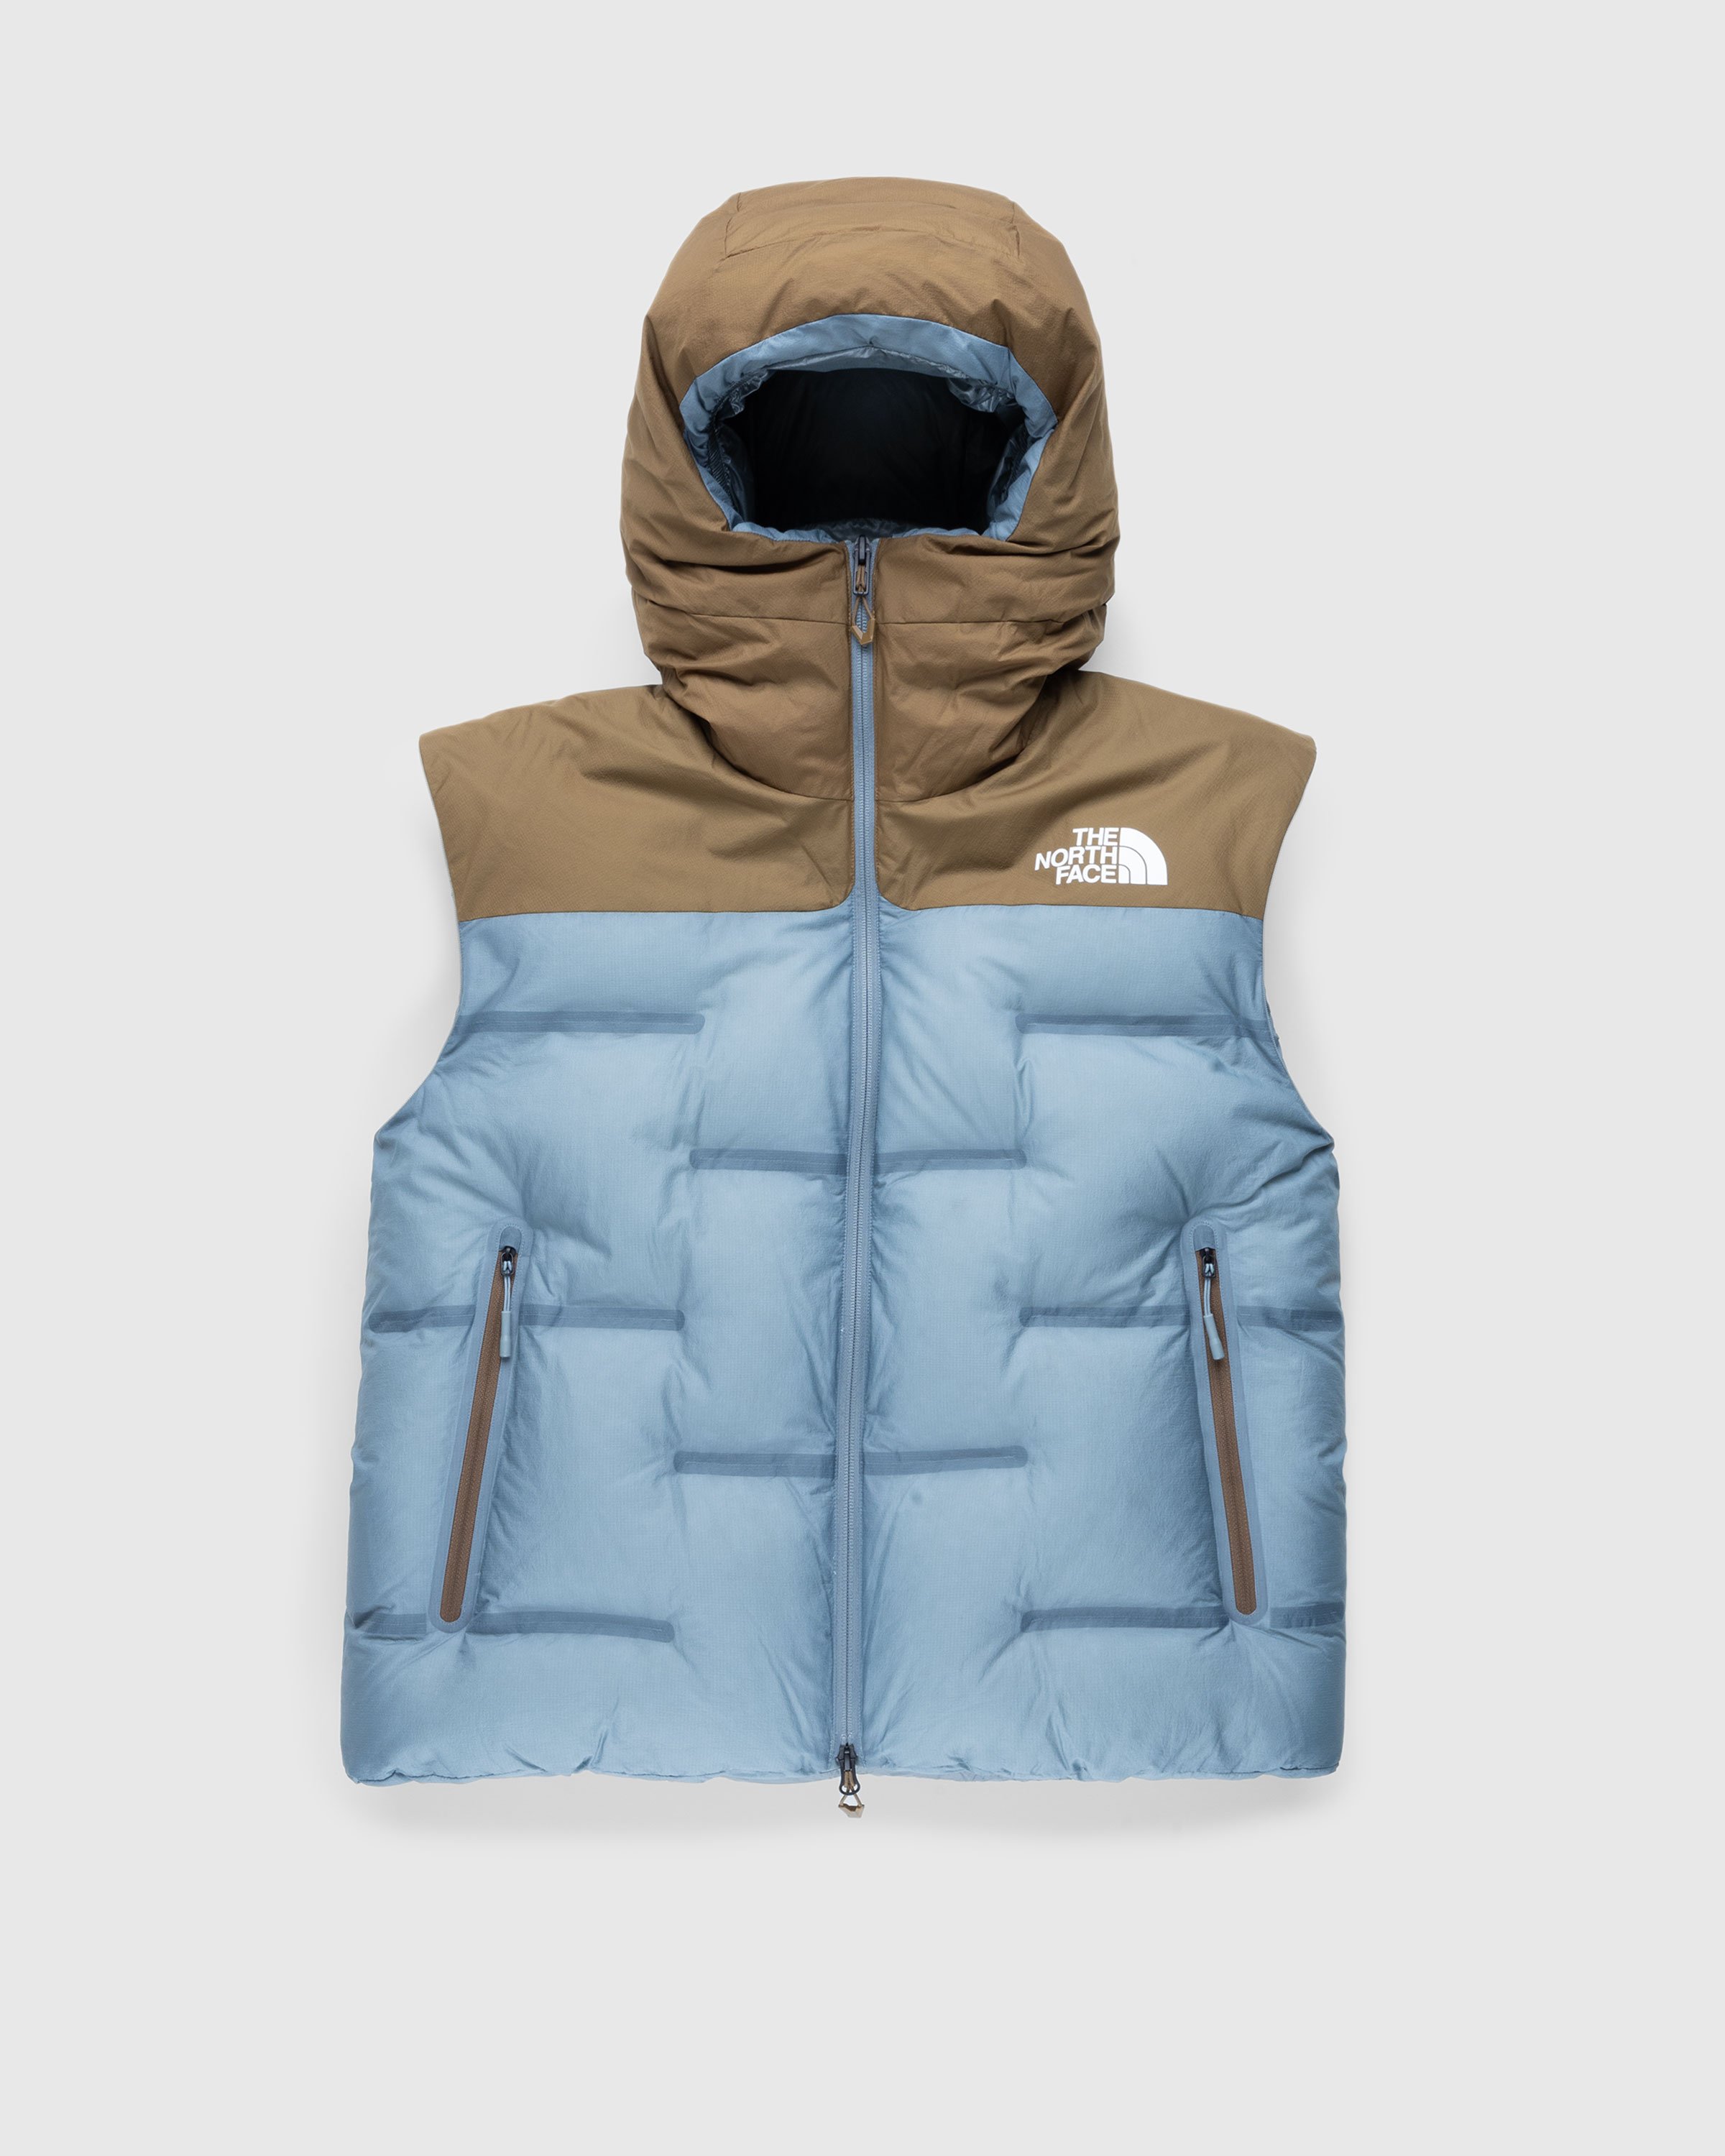 The North Face x UNDERCOVER - Soukuu Cloud Down Nupste Sepia Brown/Concrete Gray - Clothing - Multi - Image 2